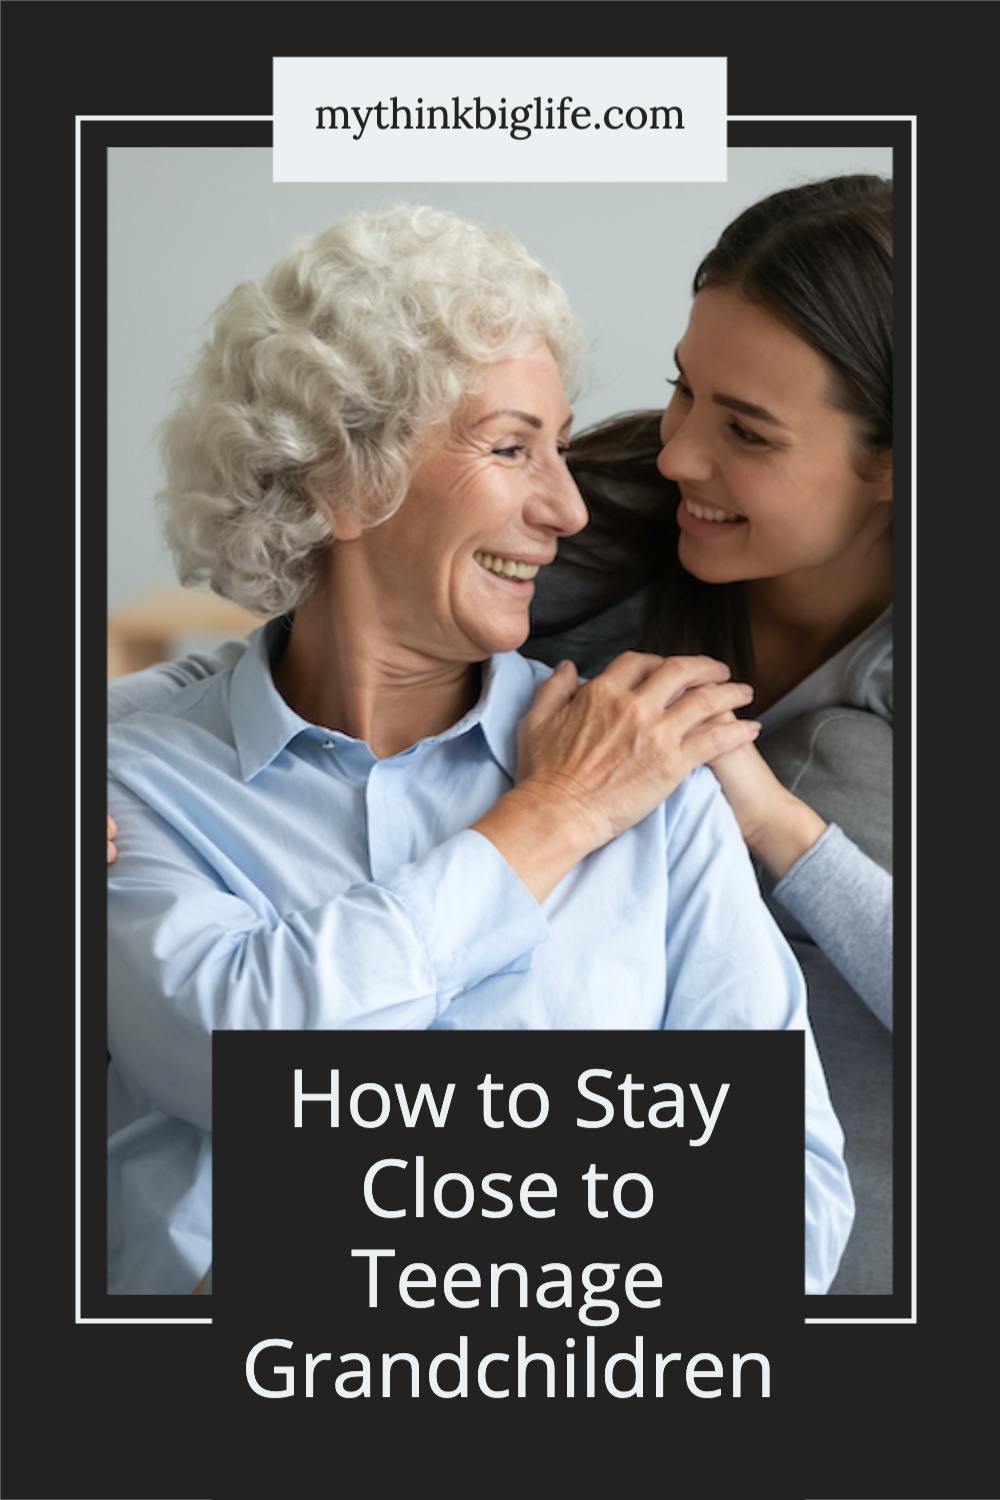 It’s a myth that teenagers don’t want to ever hang out with their grandparents! Being their grandparent doesn’t stop when they become teens. Here’s how to stay close to teenage grandchildren.